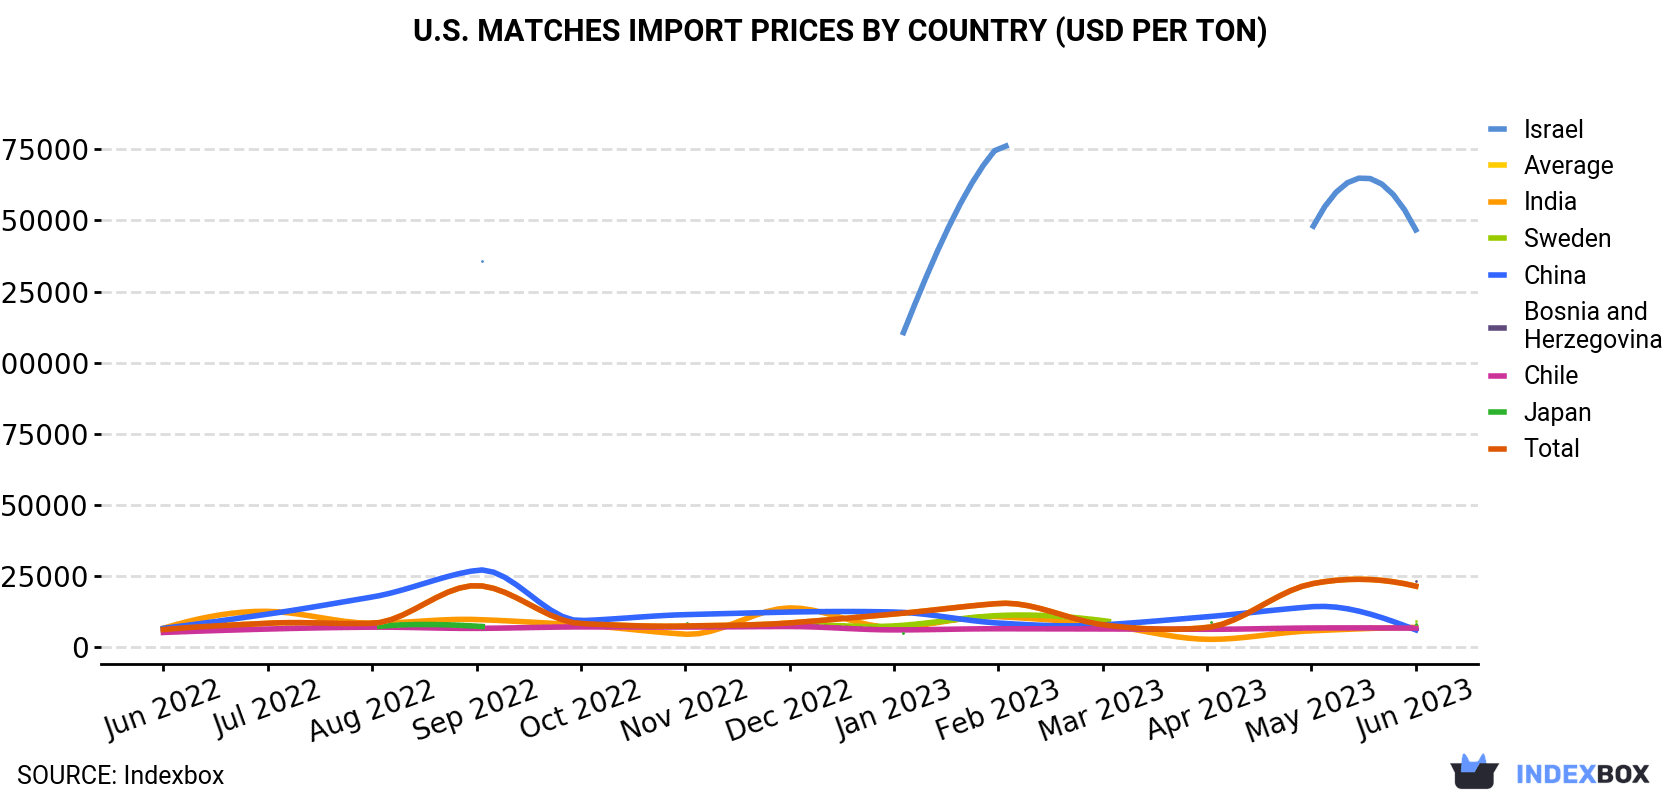 U.S. Matches Import Prices By Country (USD Per Ton)